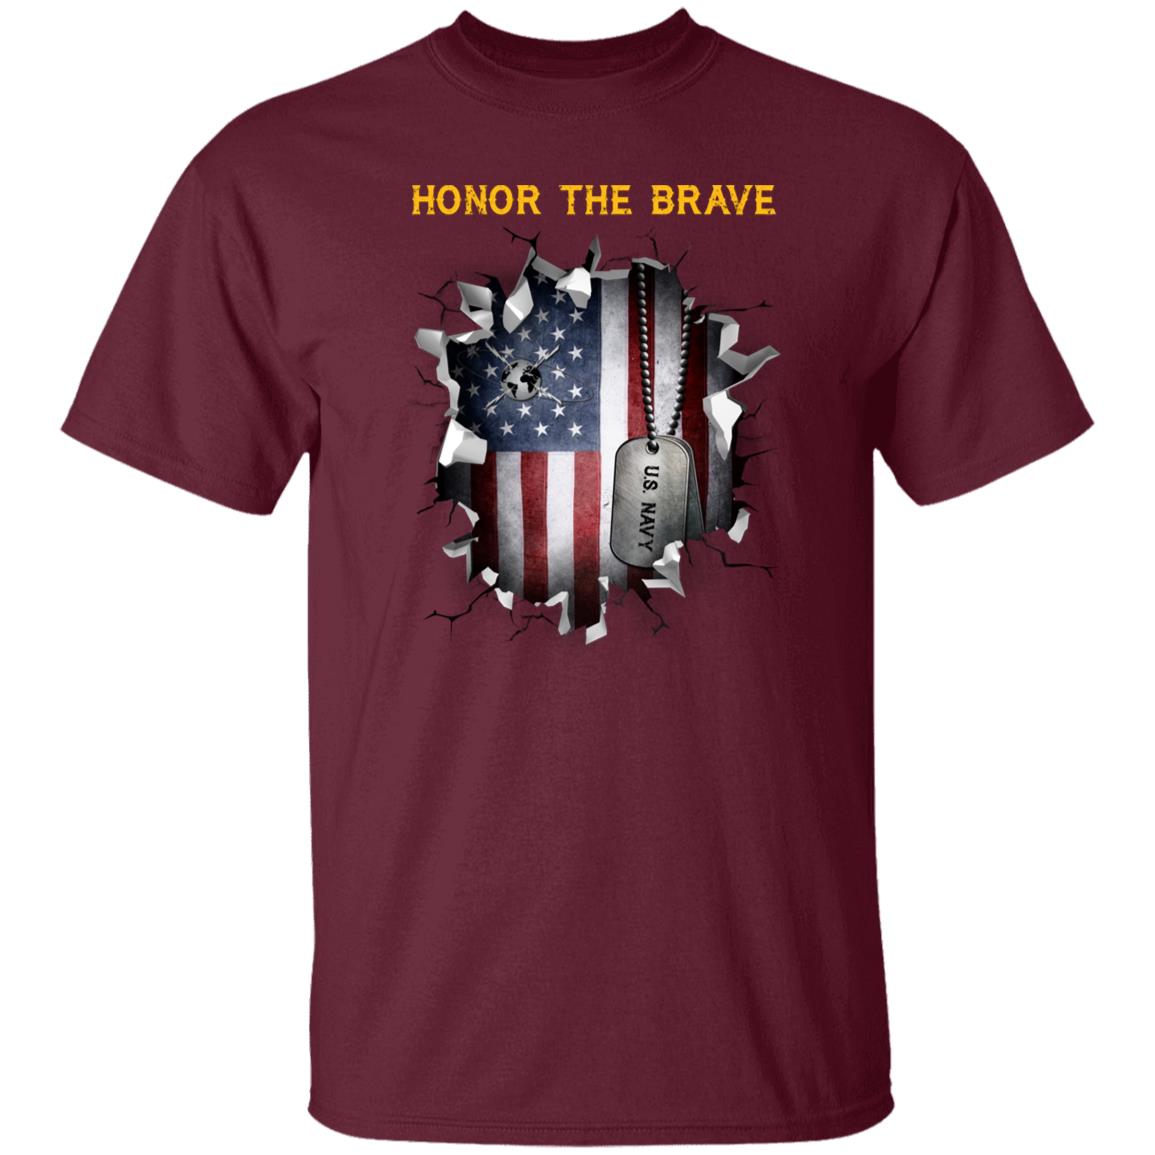 Navy Mass Communications Specialist Navy MC - Honor The Brave Front Shirt